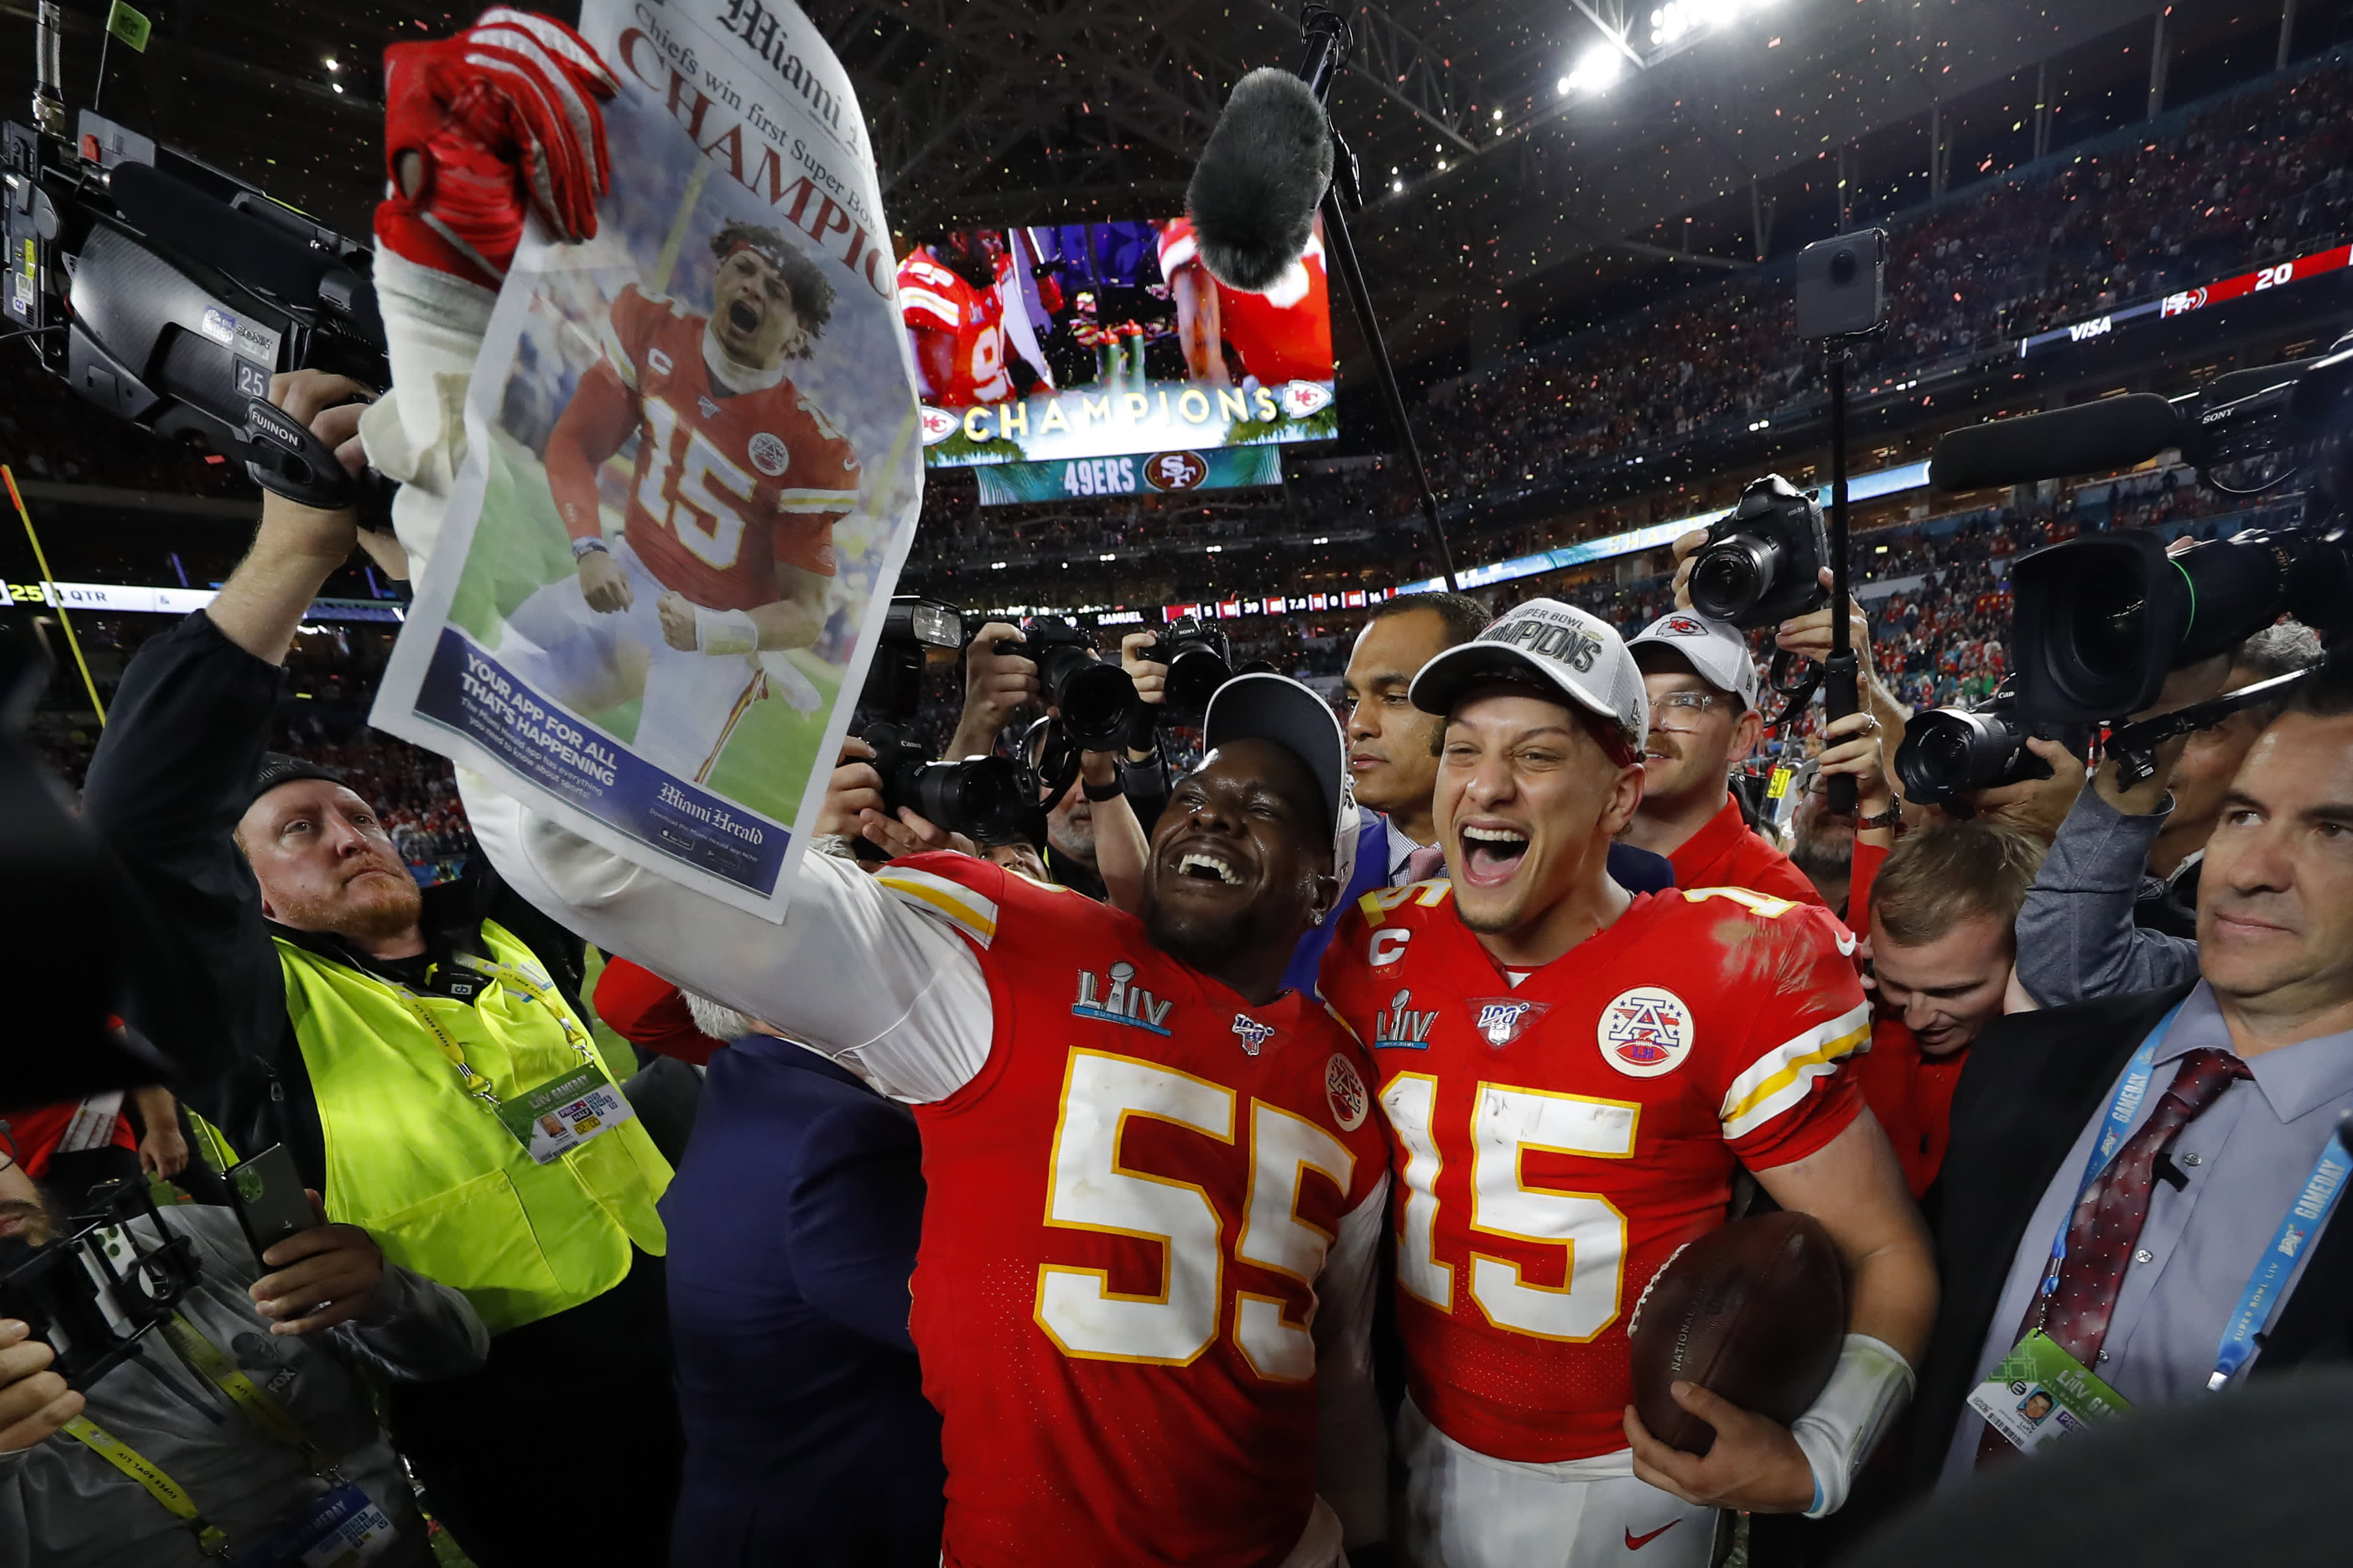 Chiefs vs. 49ers: Super Bowl LIV by the numbers, Article